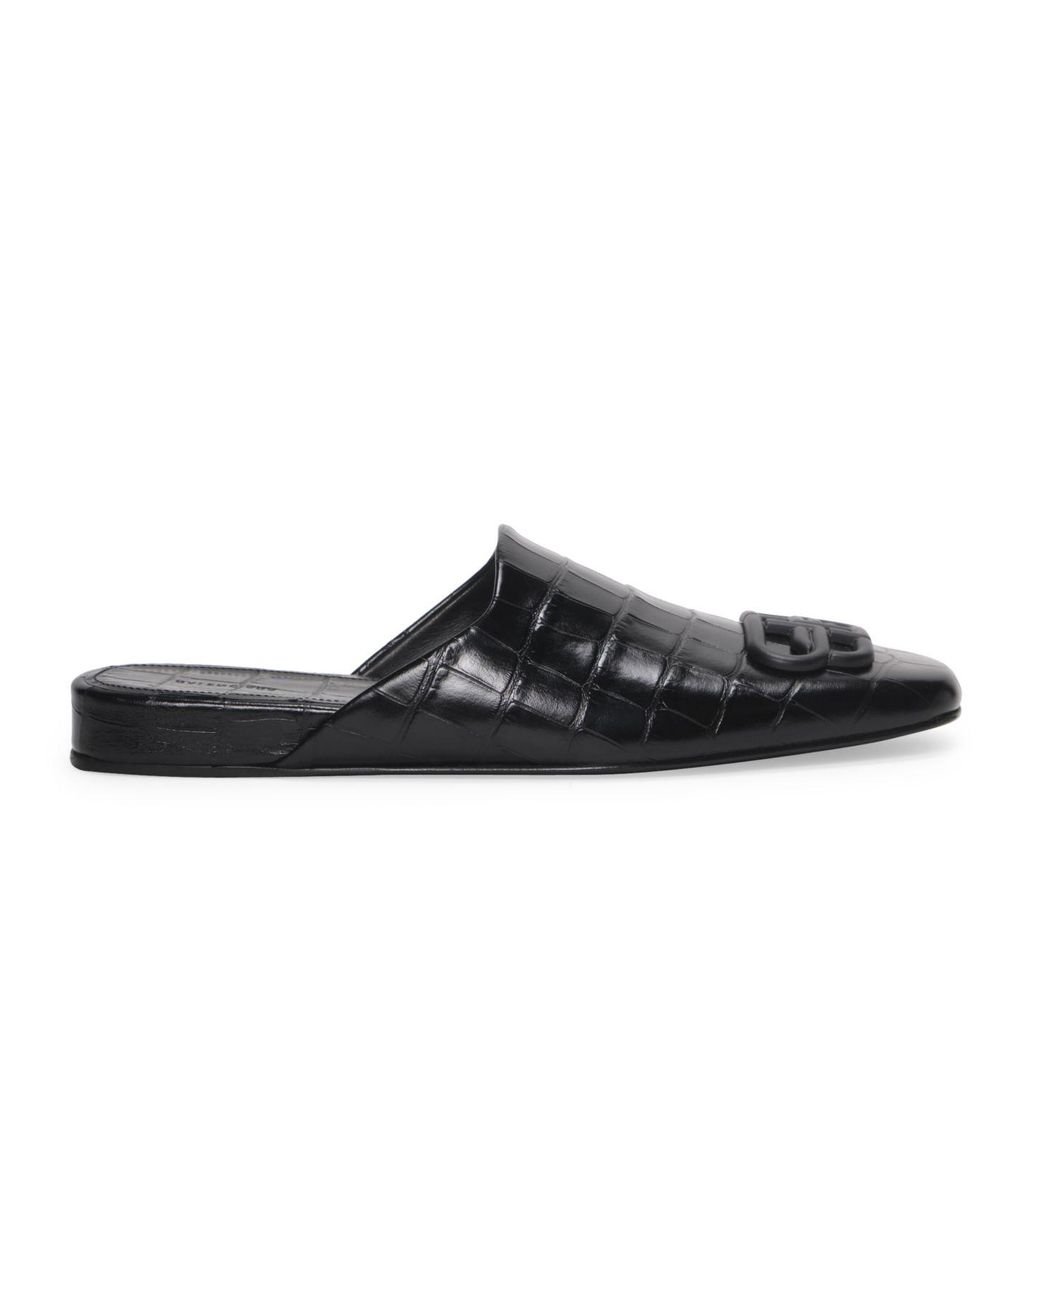 Balenciaga Cosy Bb Croc-embossed Leather Mules in Black - Lyst